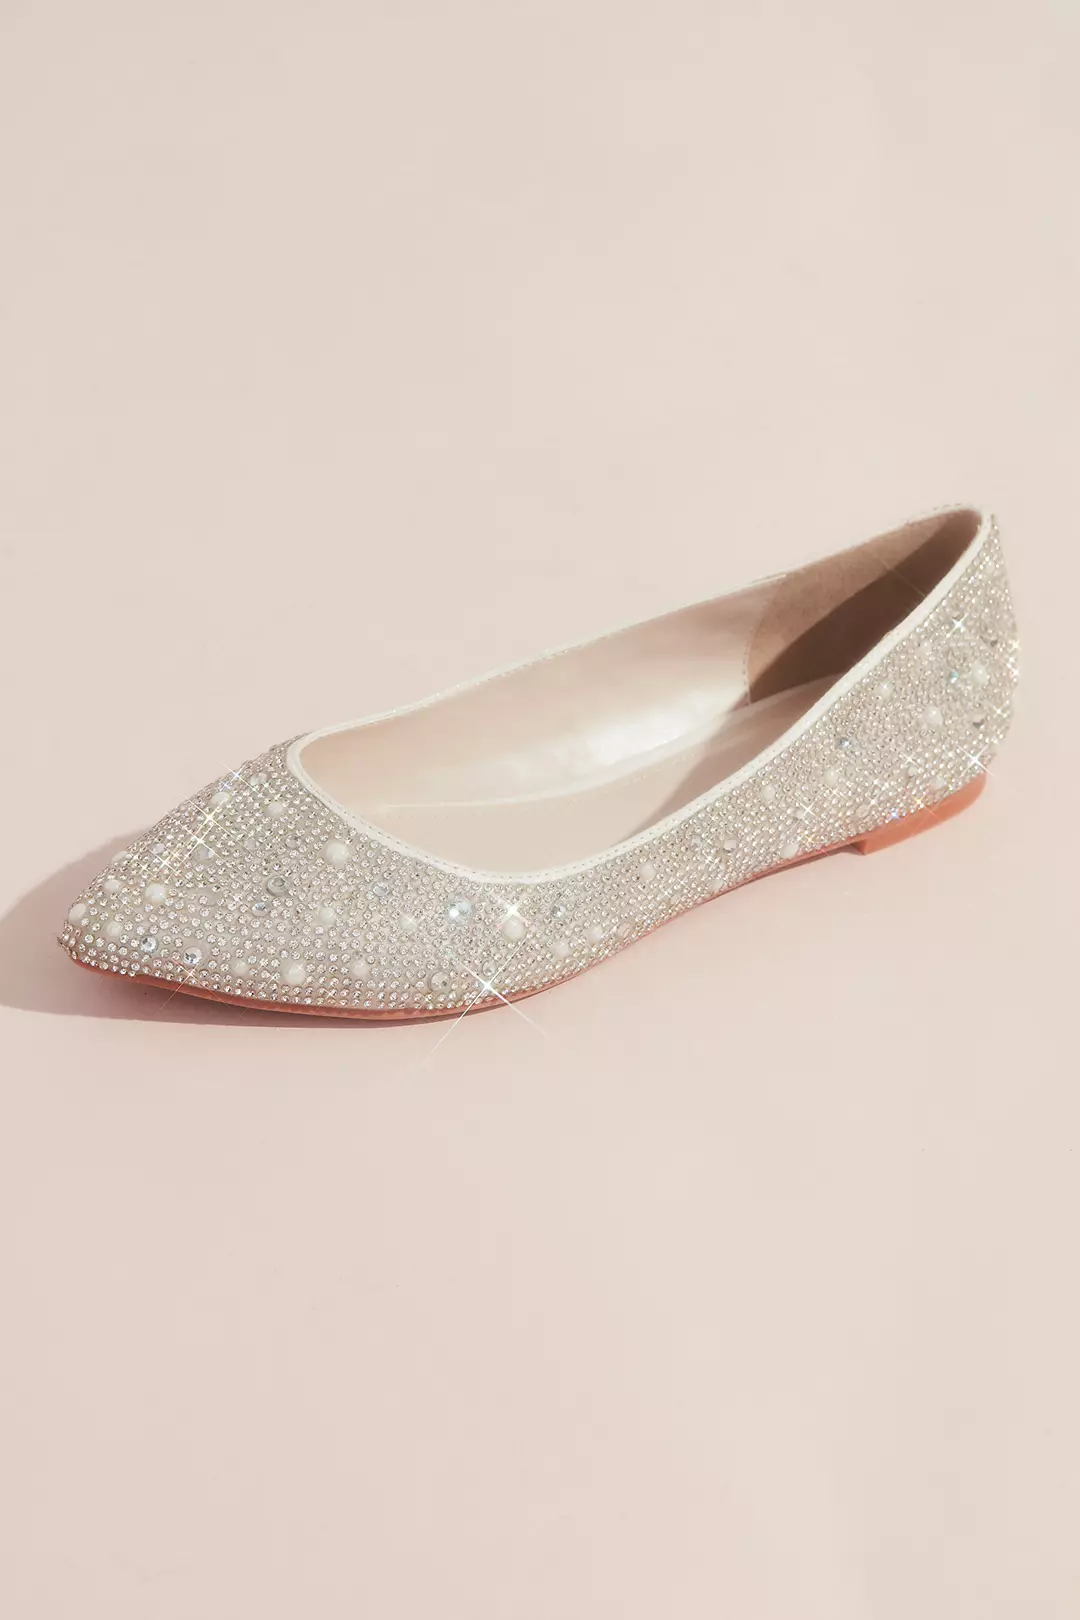 Crystal and Iridescent Stone Ballet Flats Image 1